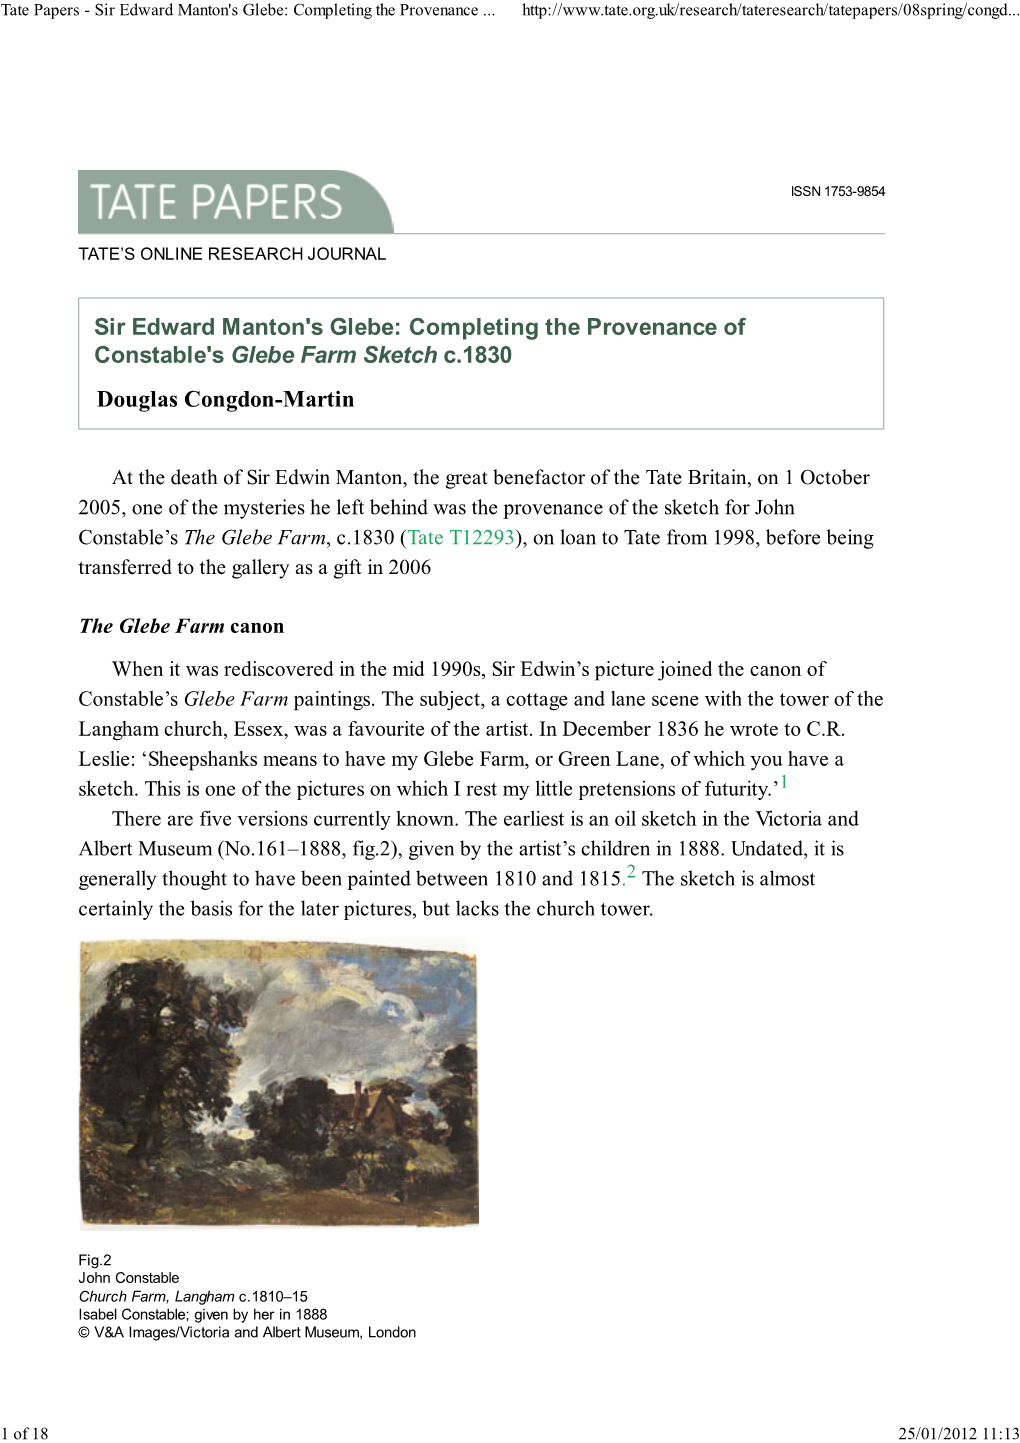 Tate Papers - Sir Edward Manton's Glebe: Completing the Provenance